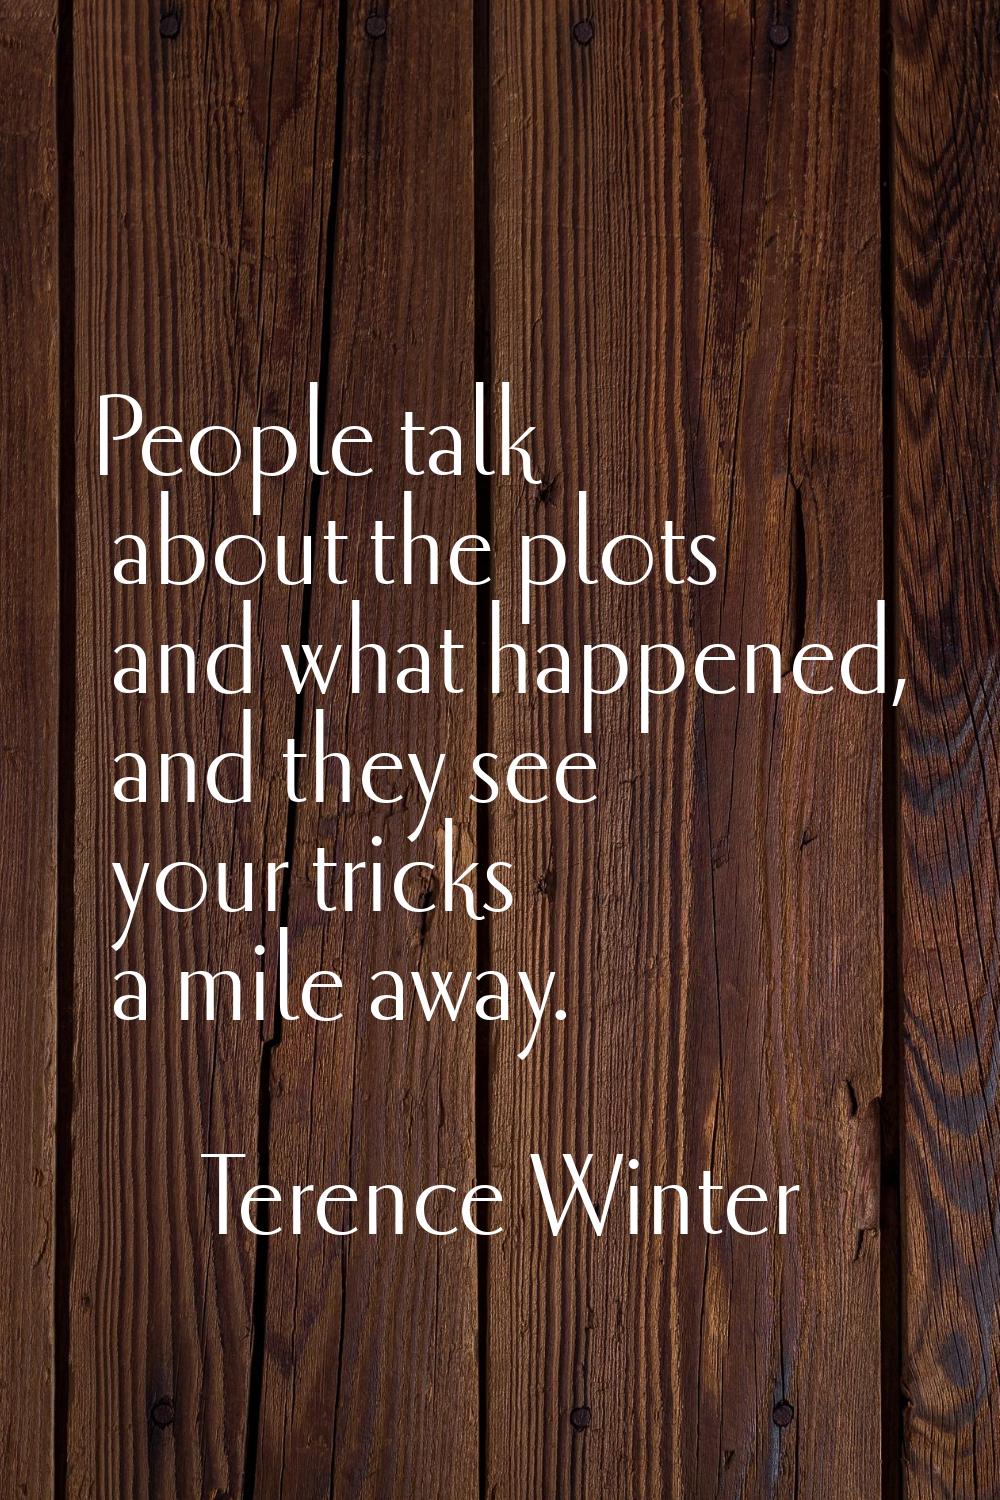 People talk about the plots and what happened, and they see your tricks a mile away.